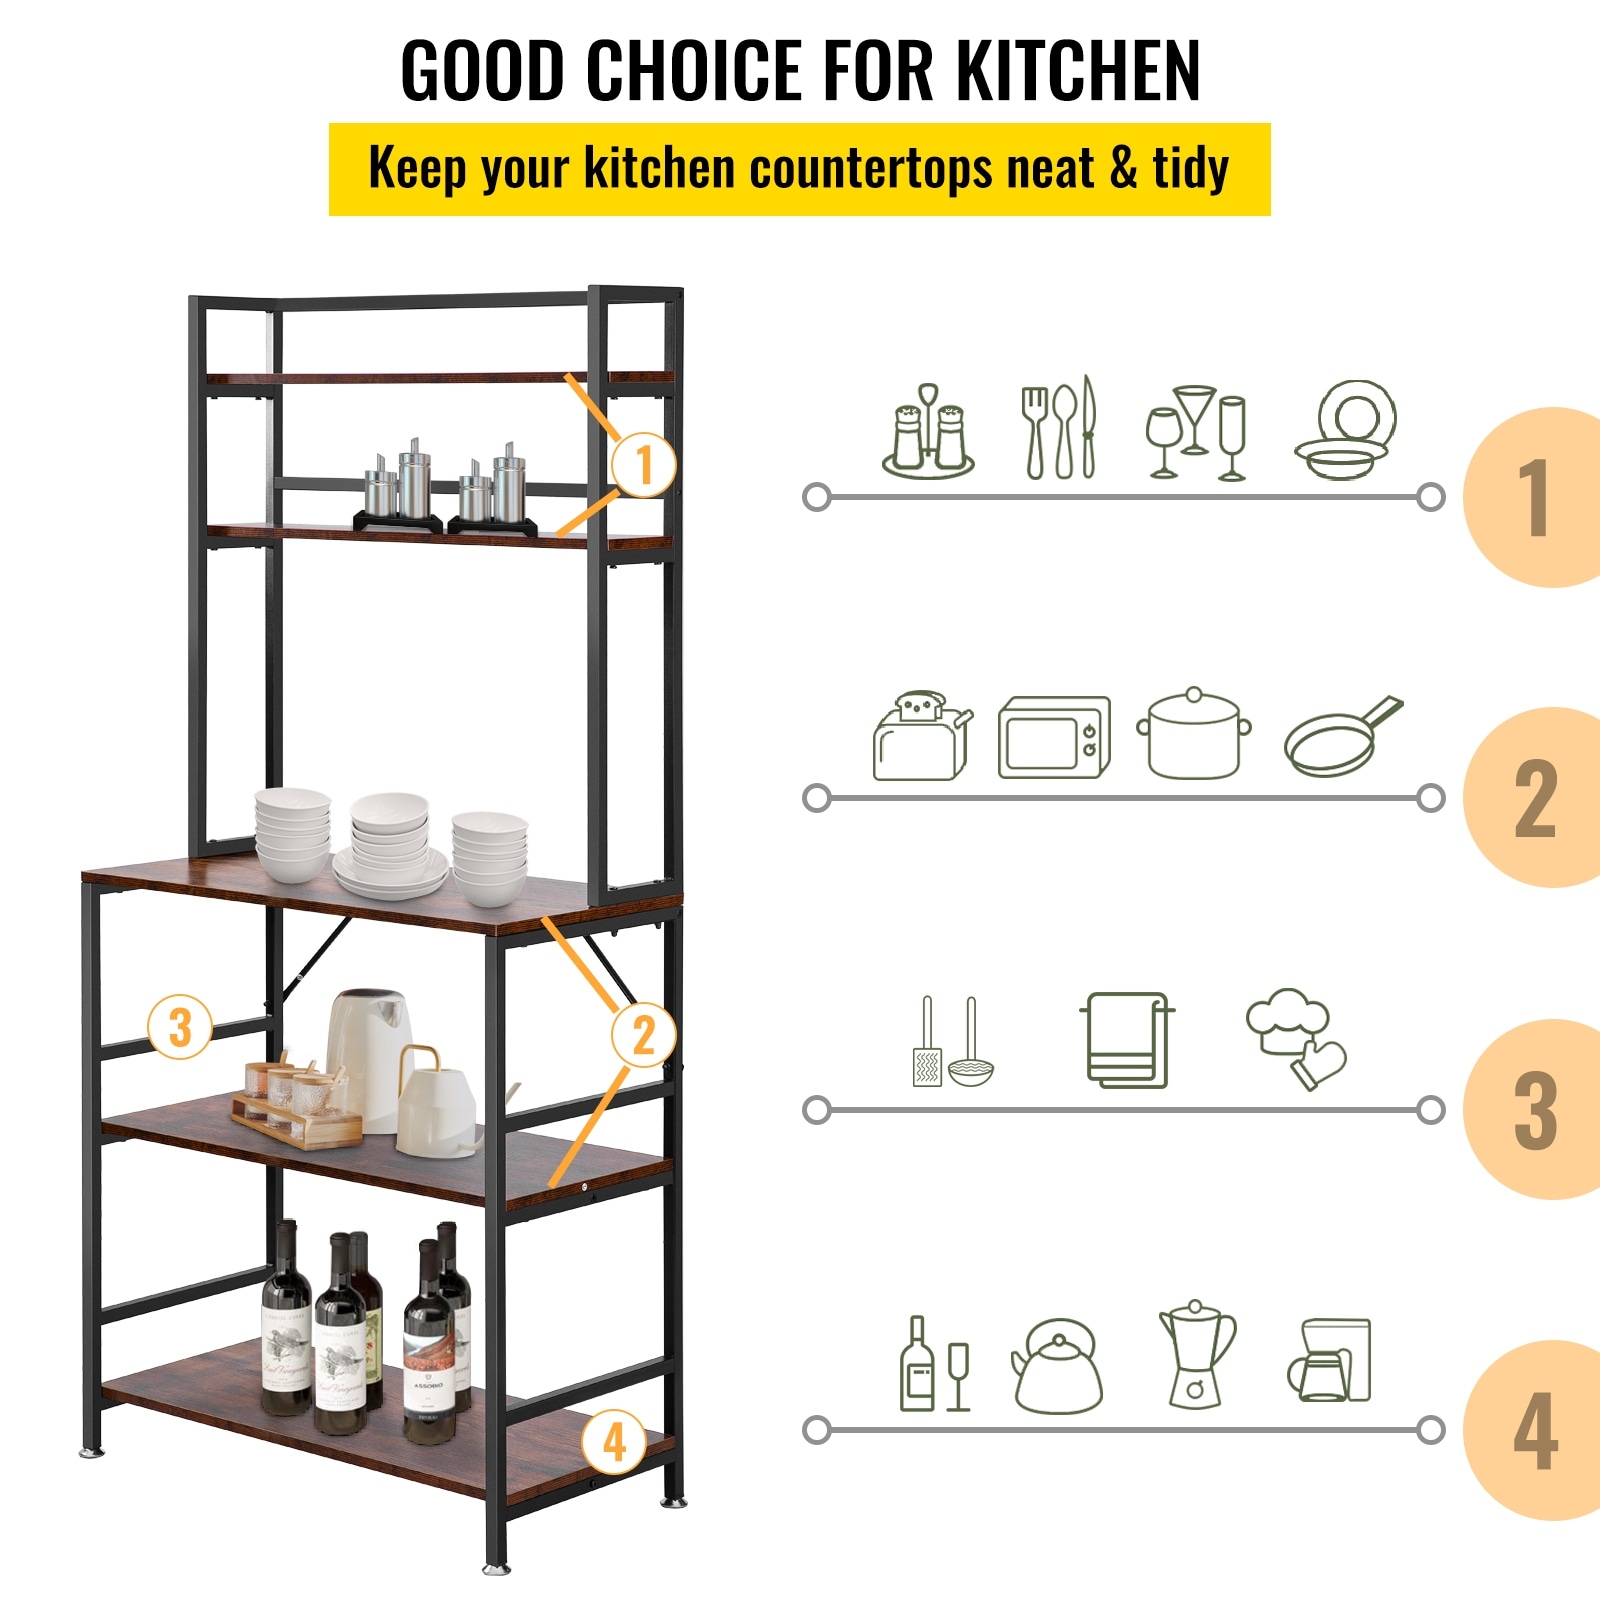 https://ak1.ostkcdn.com/images/products/is/images/direct/c708b429849814caf882aa961bdb06079223a9d4/VEVOR-Kitchen-Baker%27s-Rack-Kitchen-Storage-Shelves-Organizer-Microwave-Oven-Stand.jpg